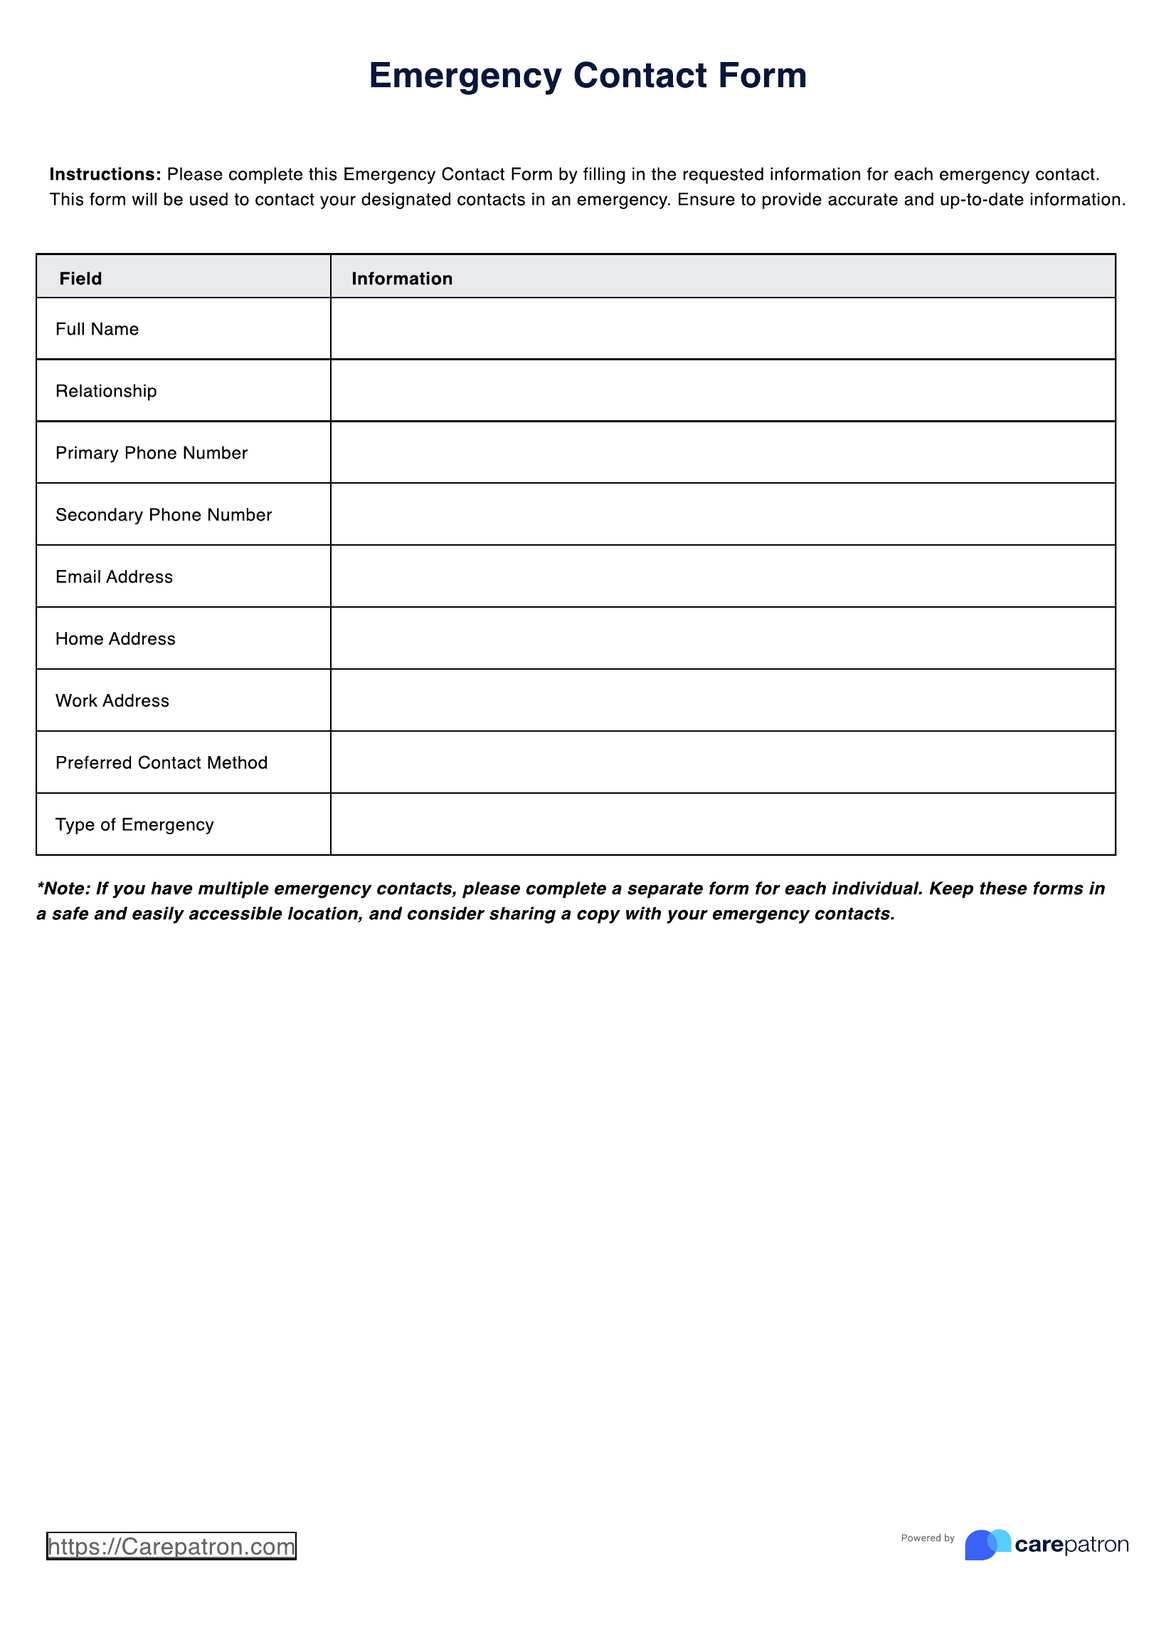 Emergency Contact Form PDF Example